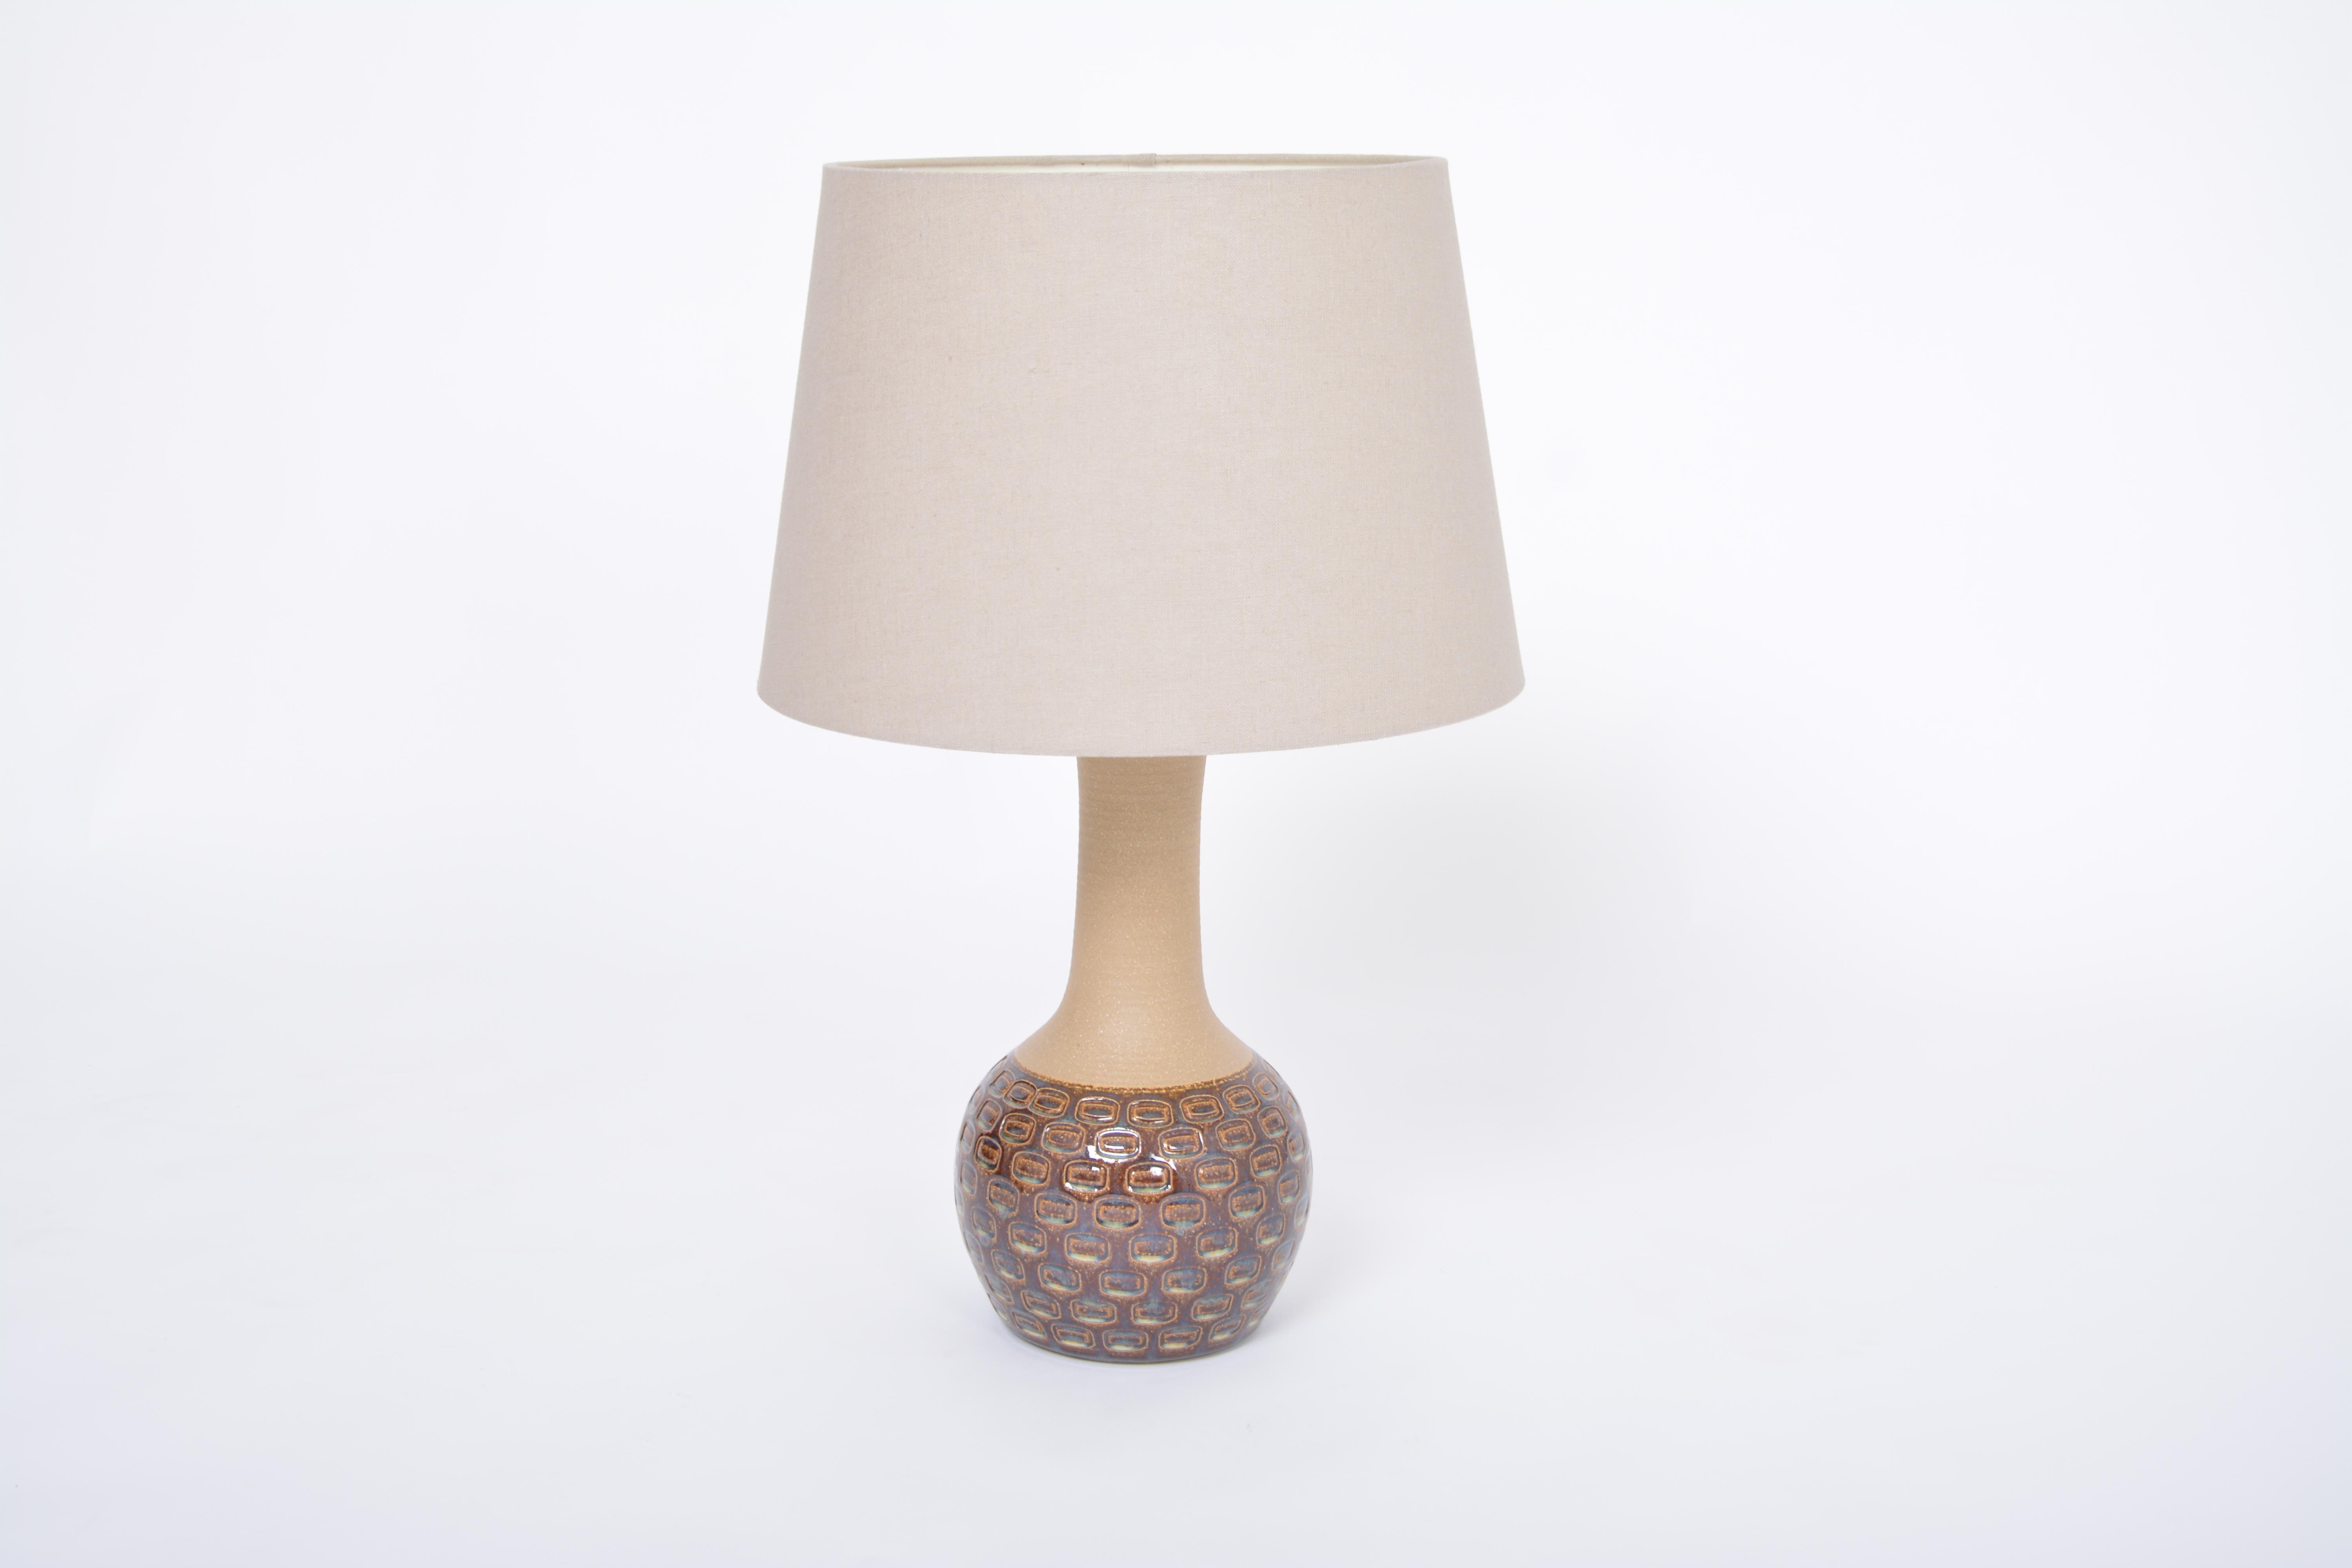 Glazed Handmade Danish Mid-Century Modern Stoneware Lamp with Graphic Pattern by Soholm For Sale